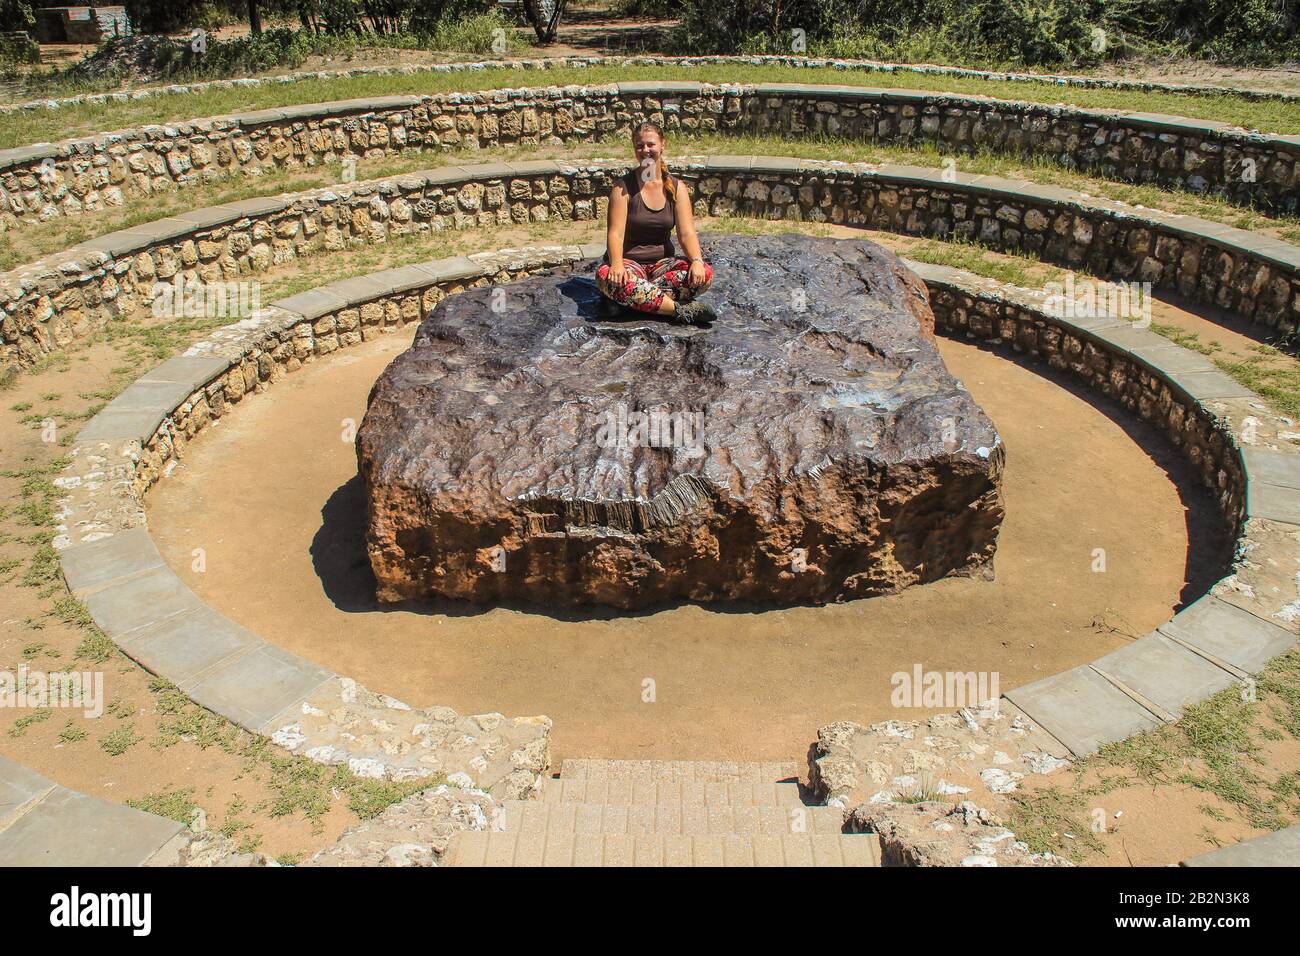 The largest meteorite in the world at Grootfontein, Namibia. A huge piece of iron from space. White girl tourist sitting on a meteorite Stock Photo